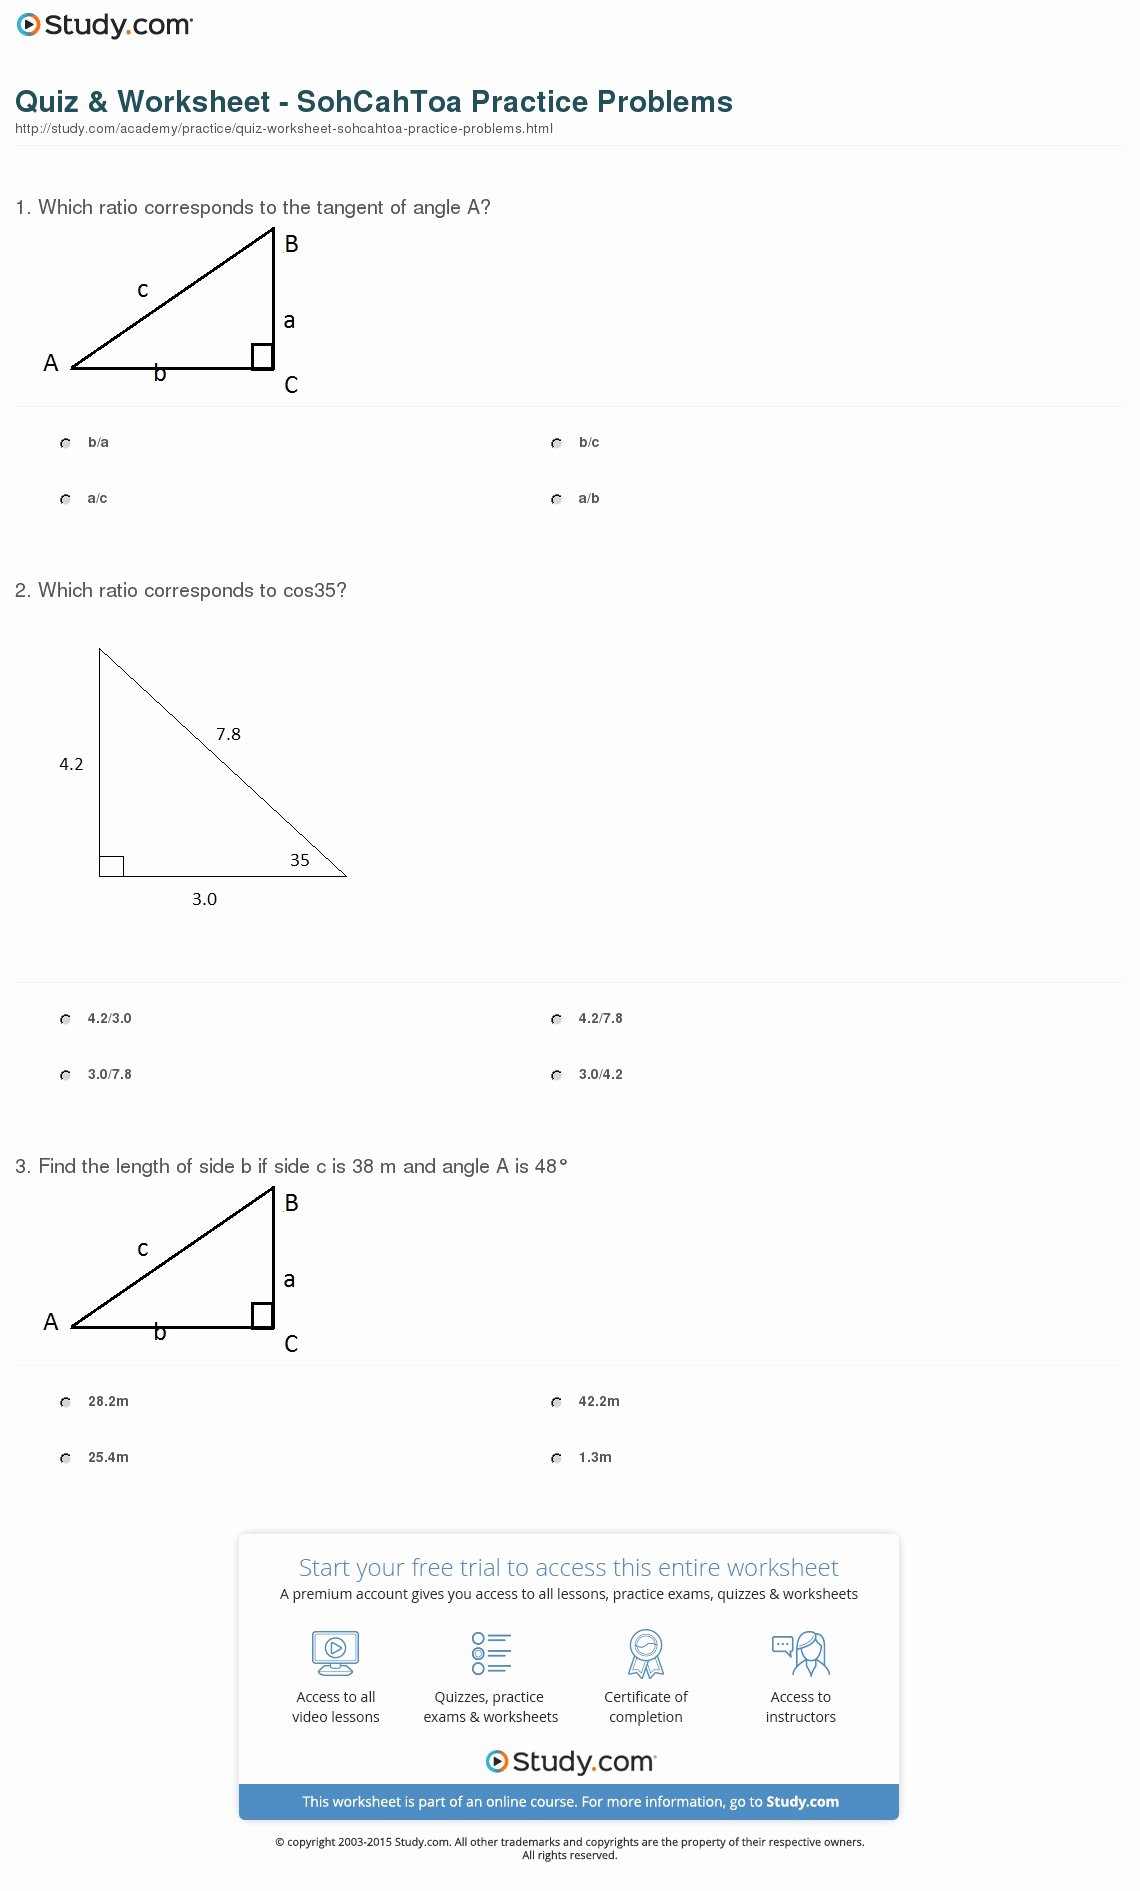 Soh Cah toa Worksheet Lovely Quiz &amp; Worksheet sohcahtoa Practice Problems